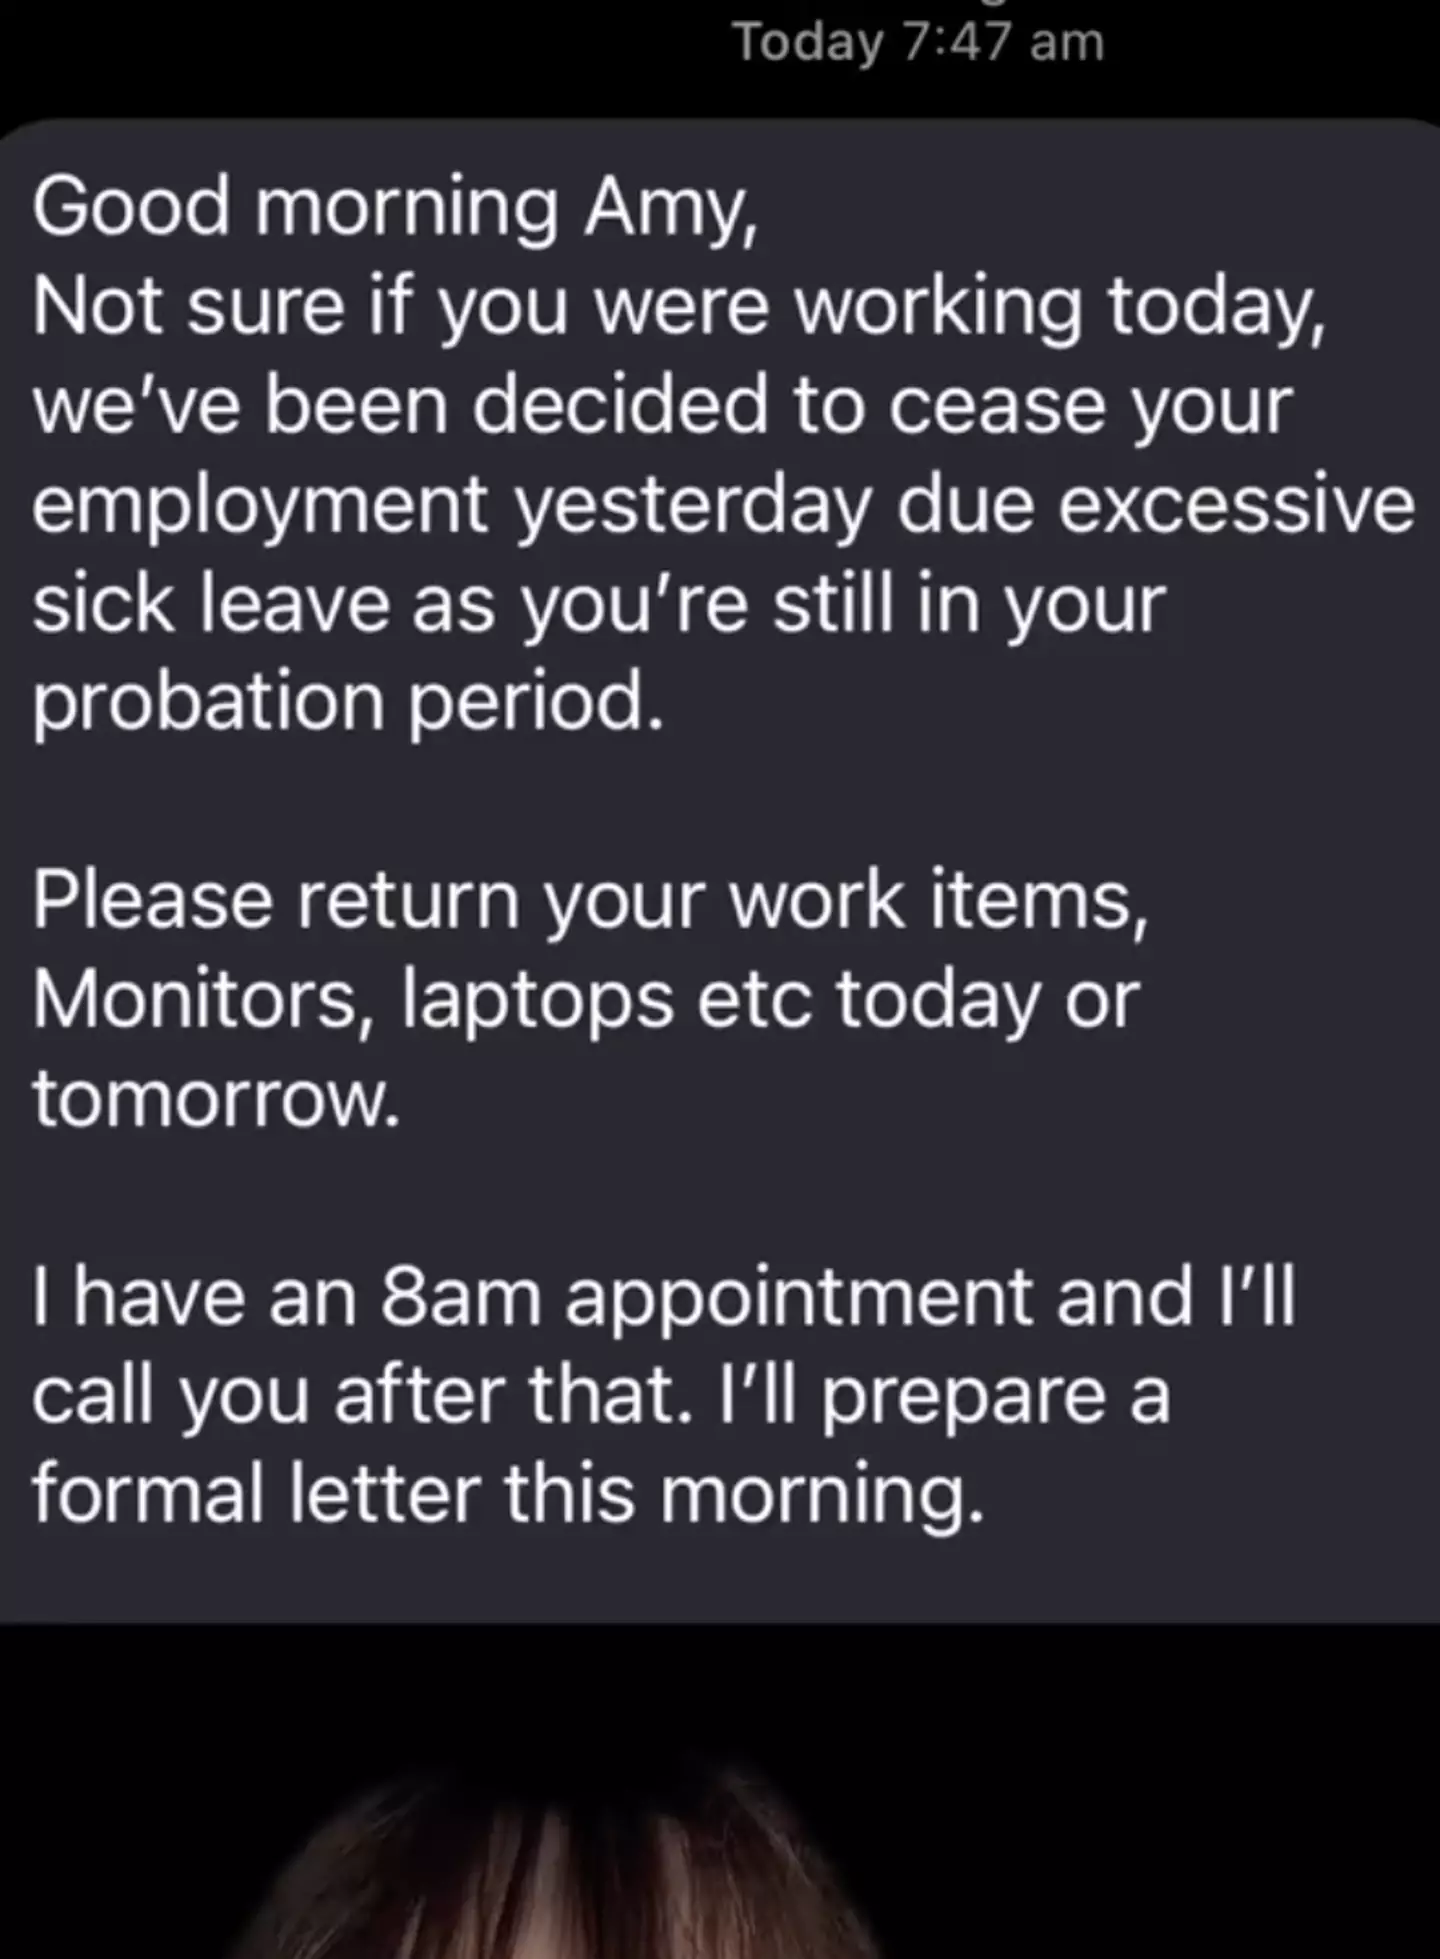 The message allegedly sent by her boss.